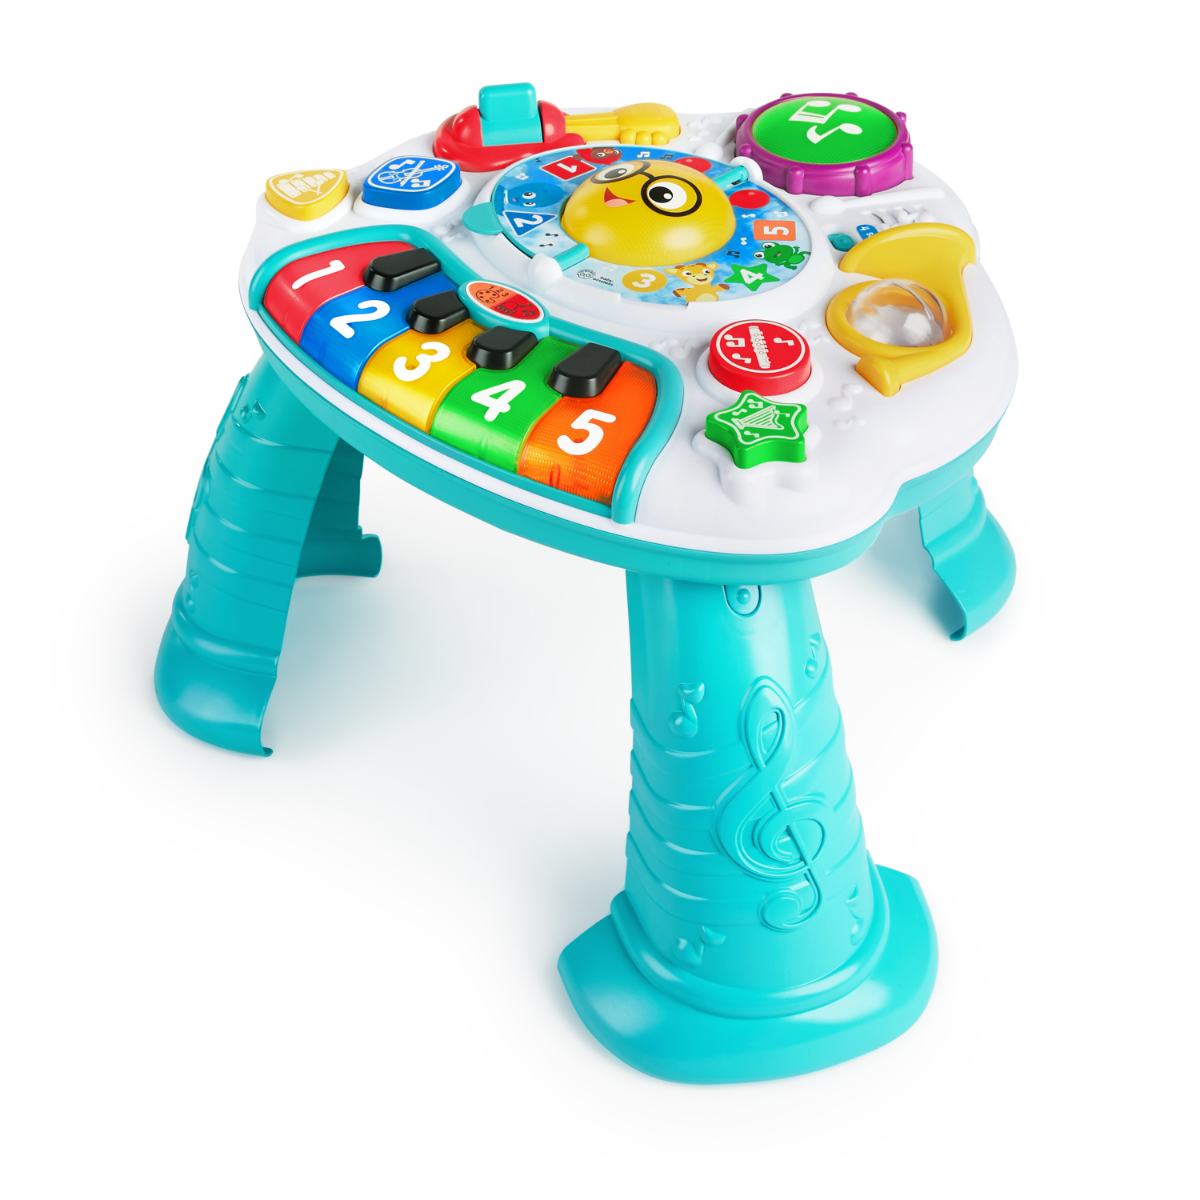 Discovering Music™ Activity Table